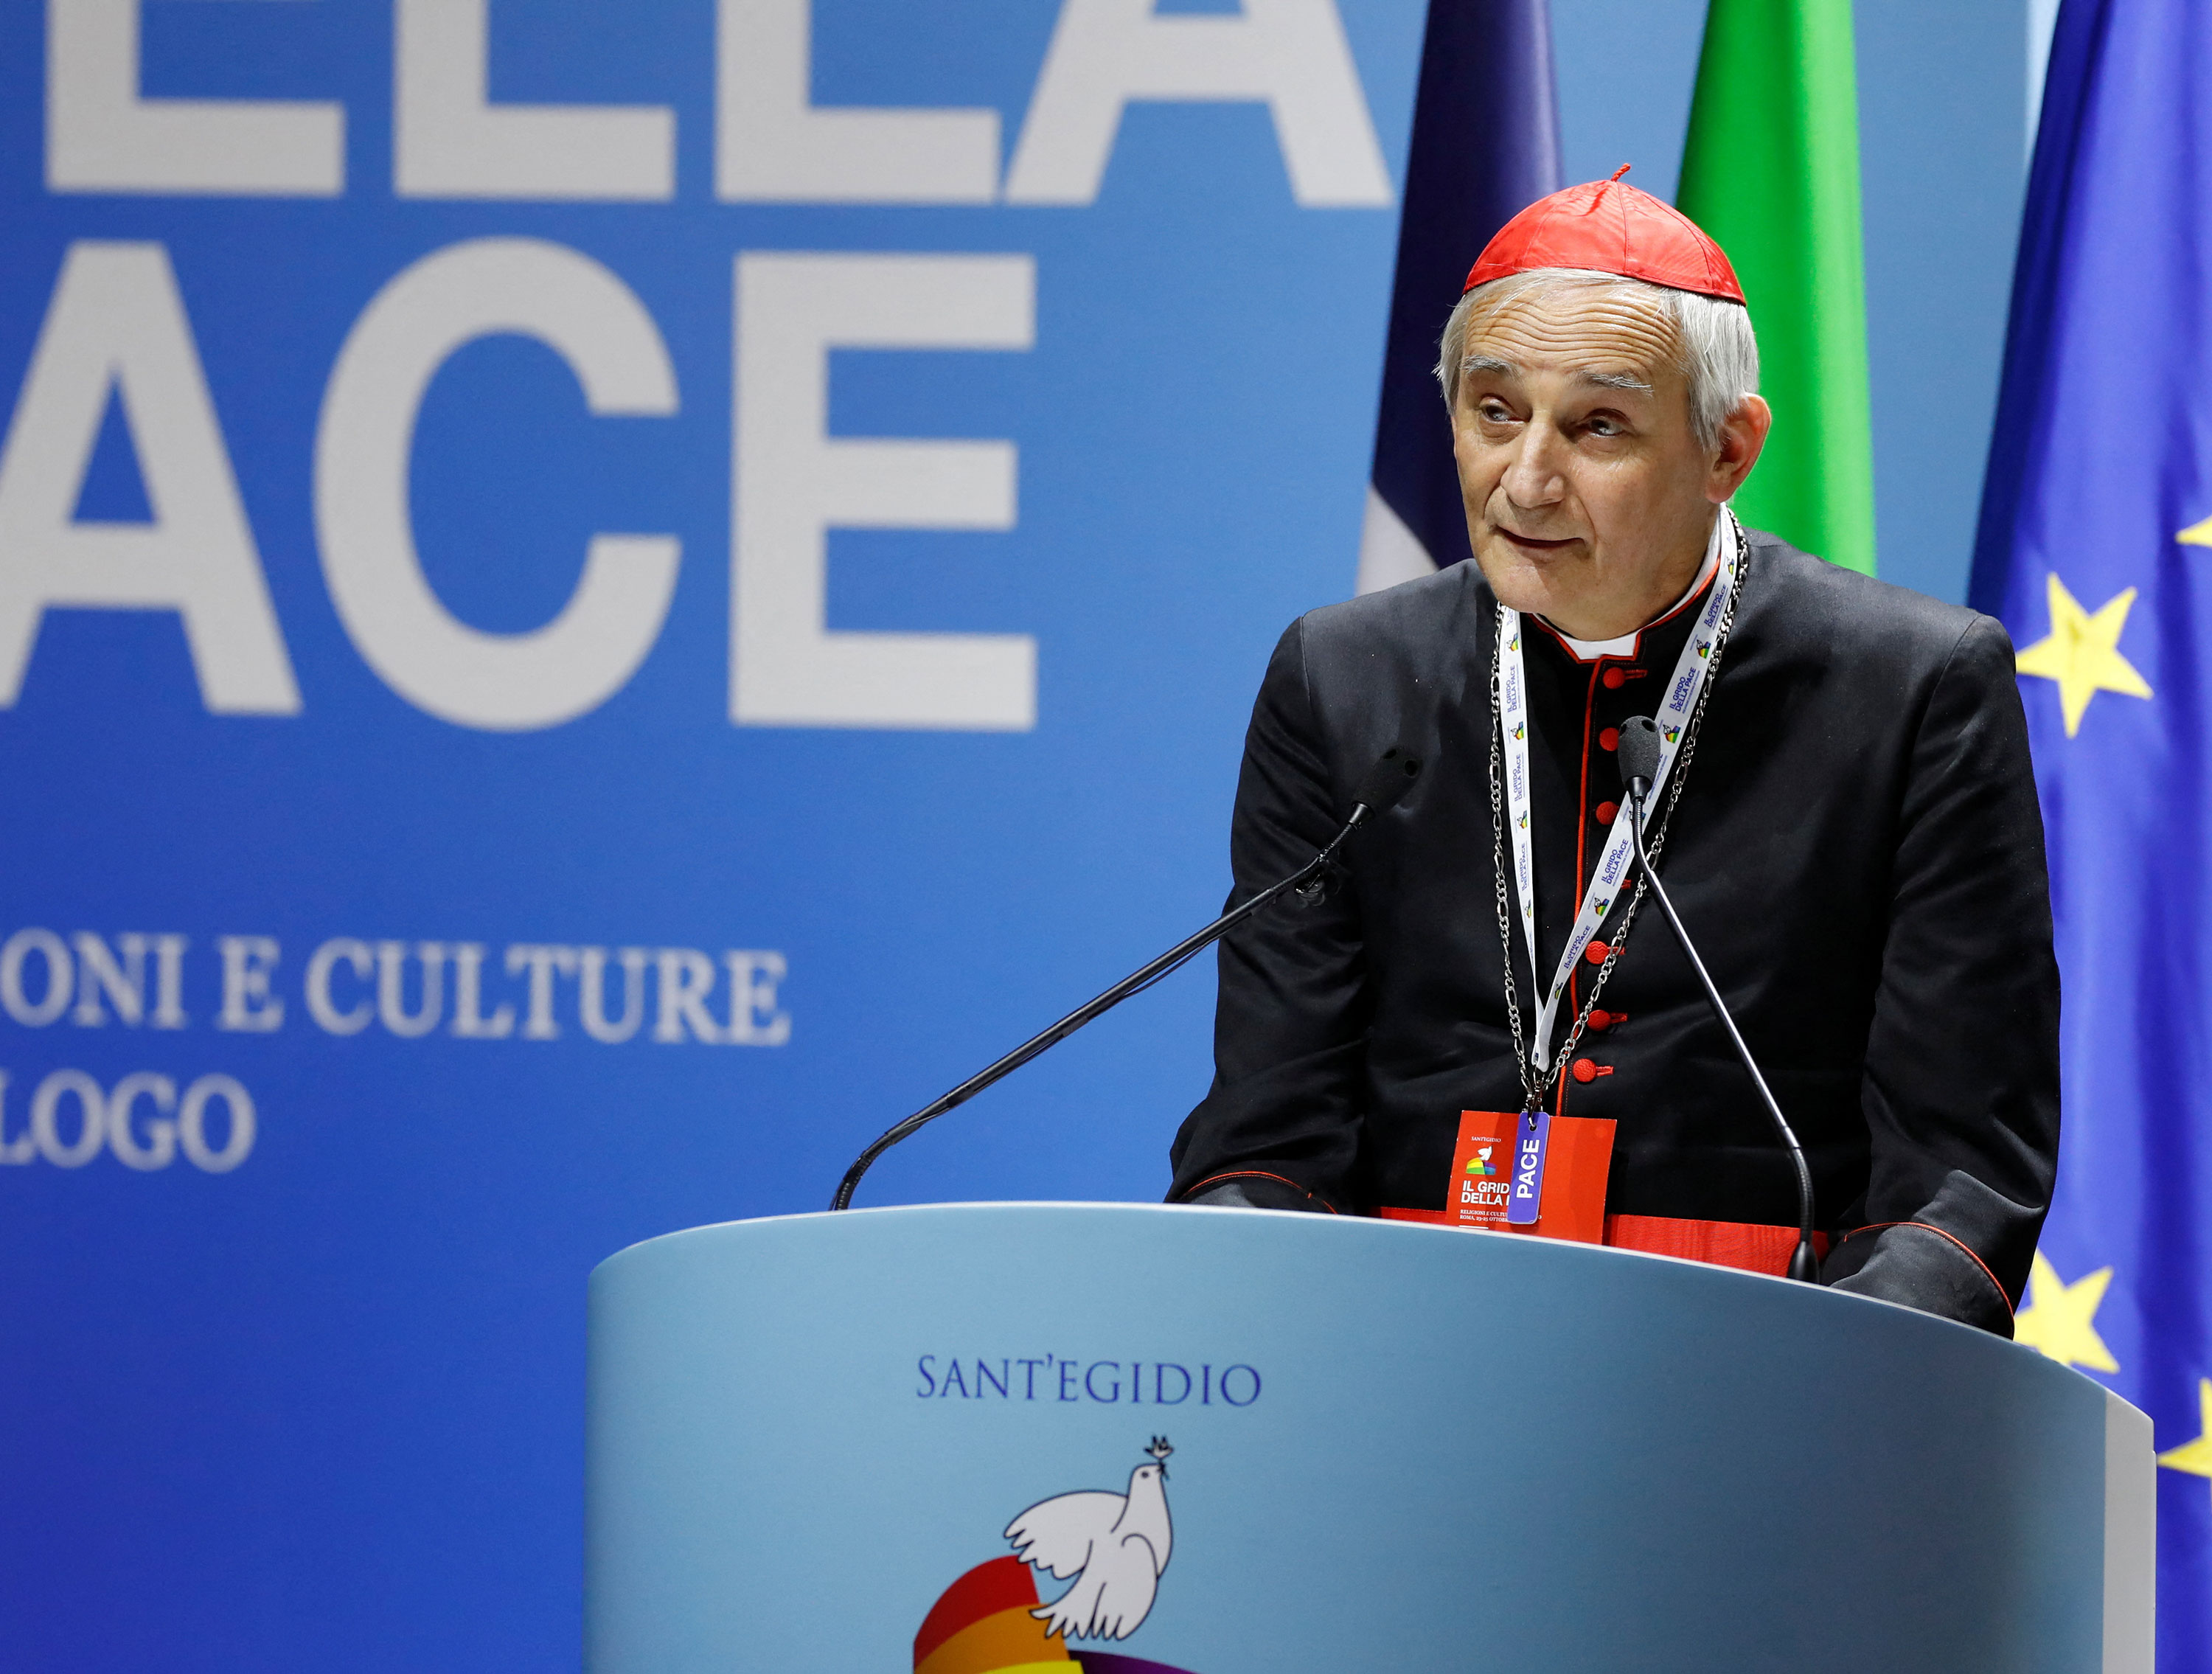 Cardinal Matteo Zuppi speaks at the opening of the inter-religious meeting "The Cry of Peace" in Rome on October 23, 2022. 